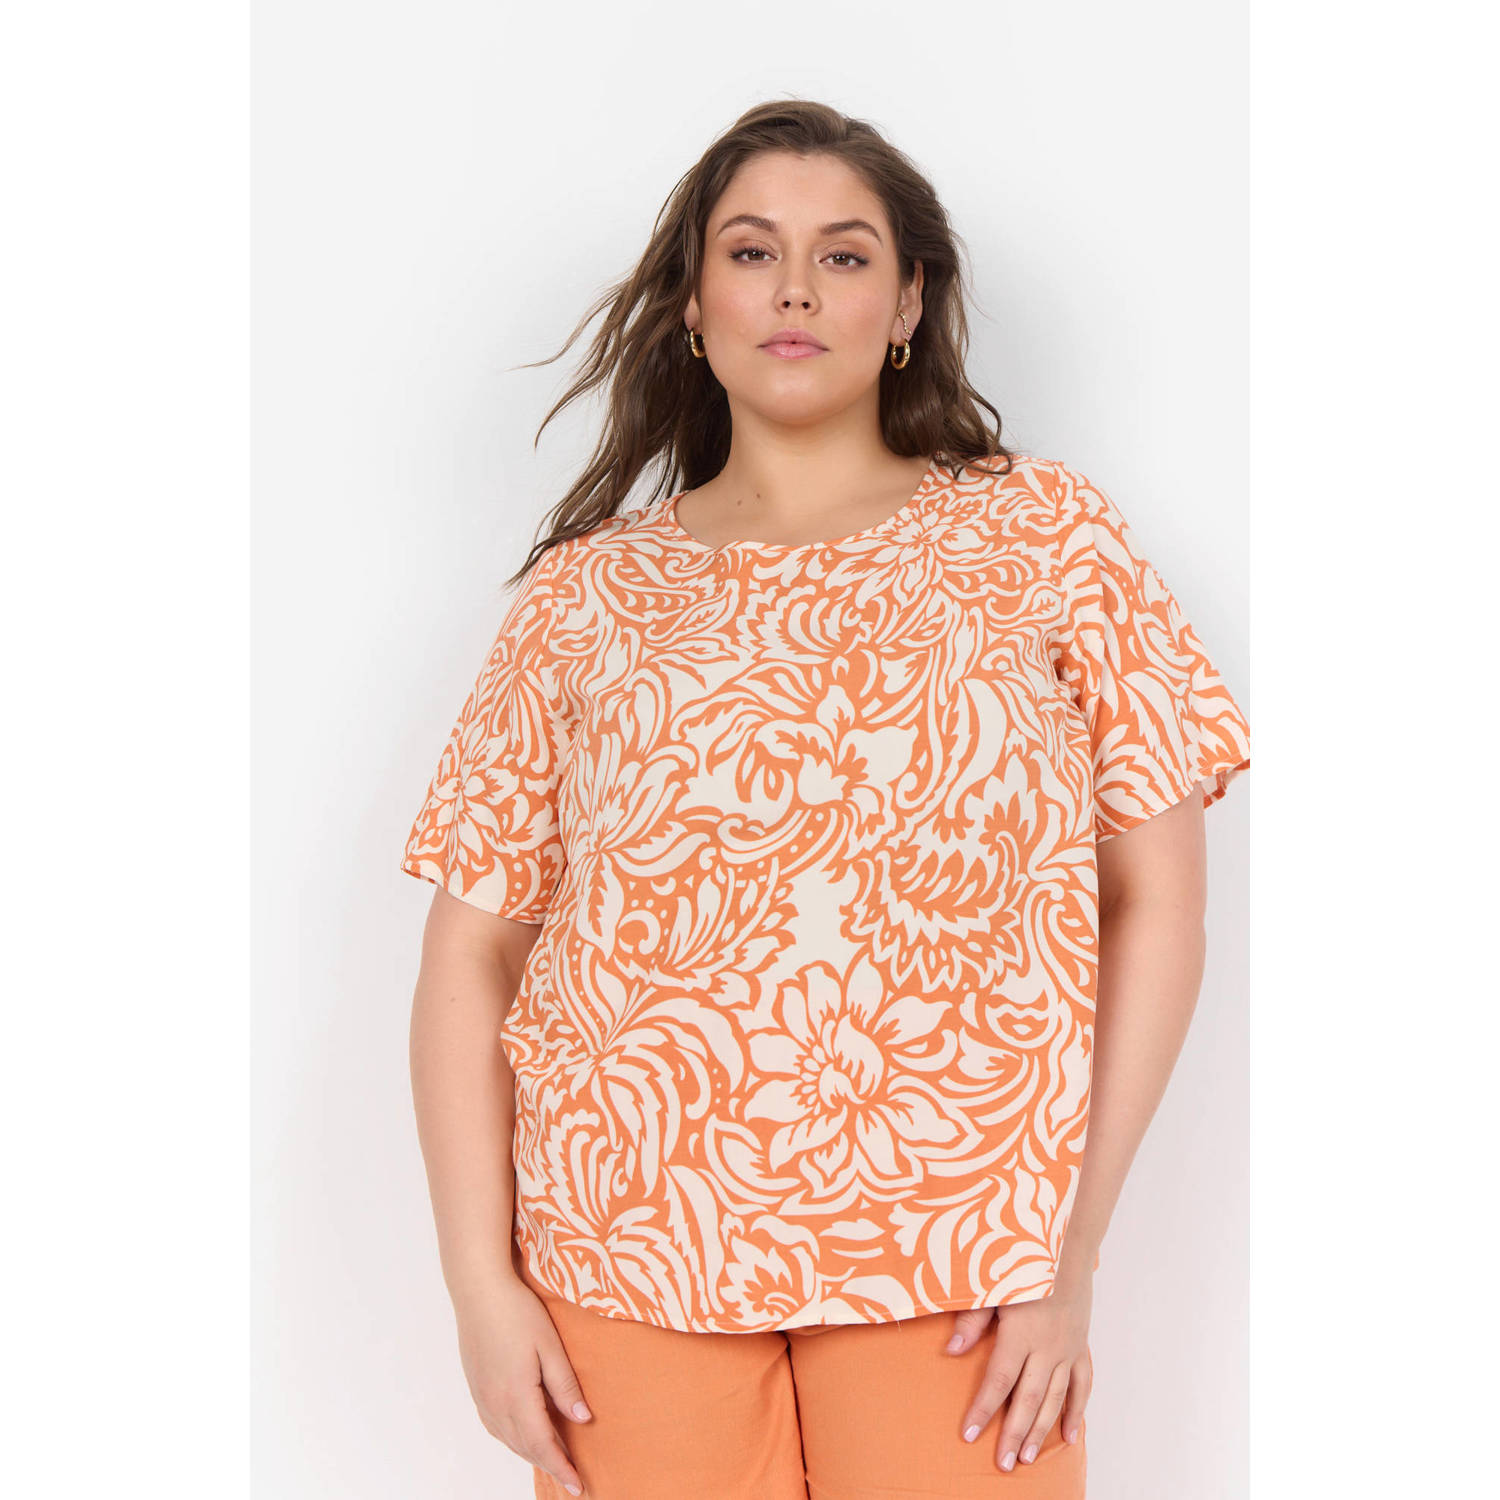 Wasabiconcept top met all over print oranje wit